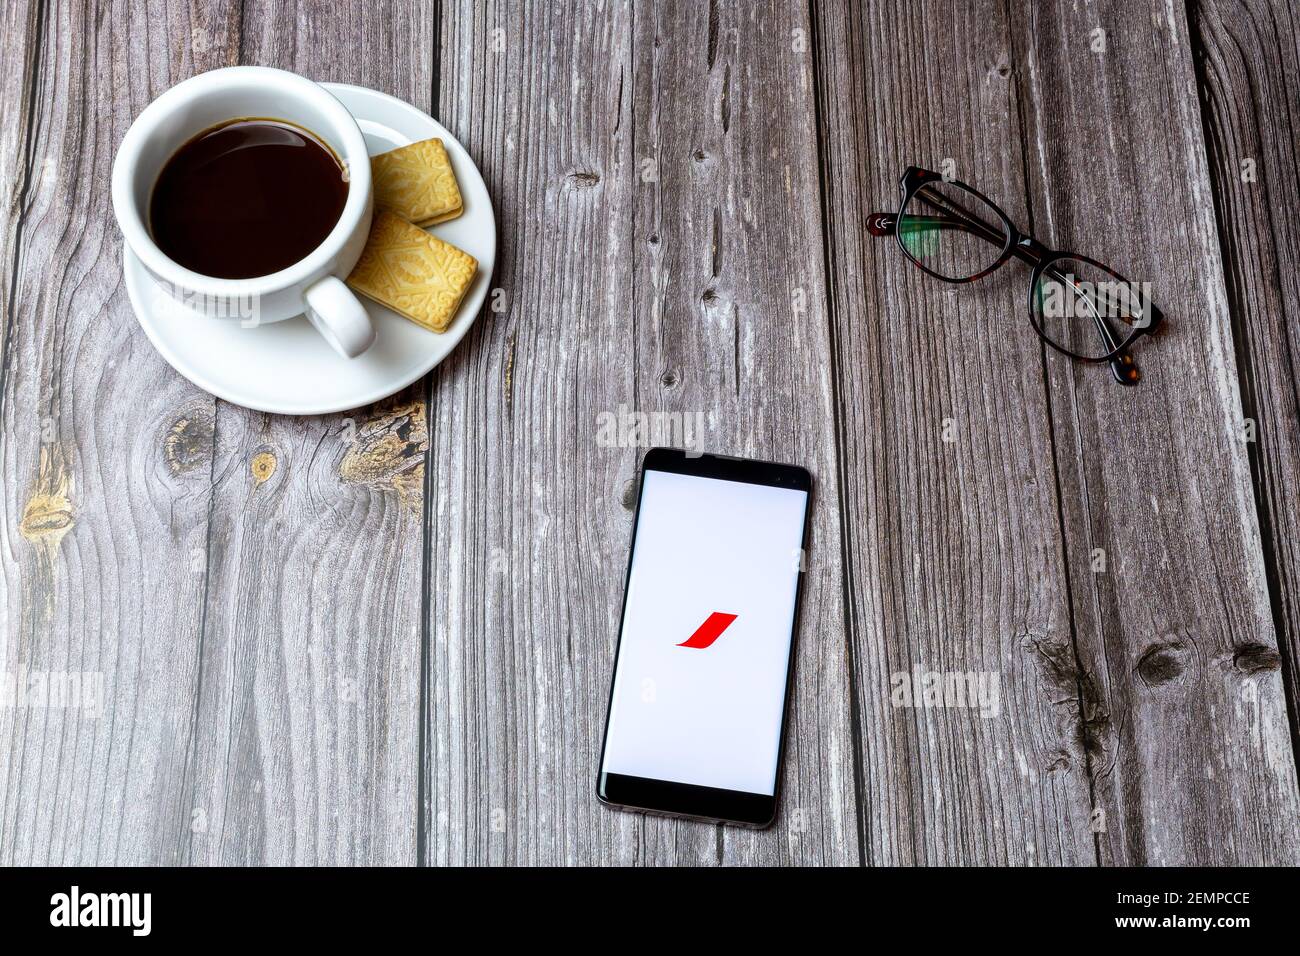 A mobile phone or cell phone on a wooden table with the Air France app open next to a coffee and glasses Stock Photo